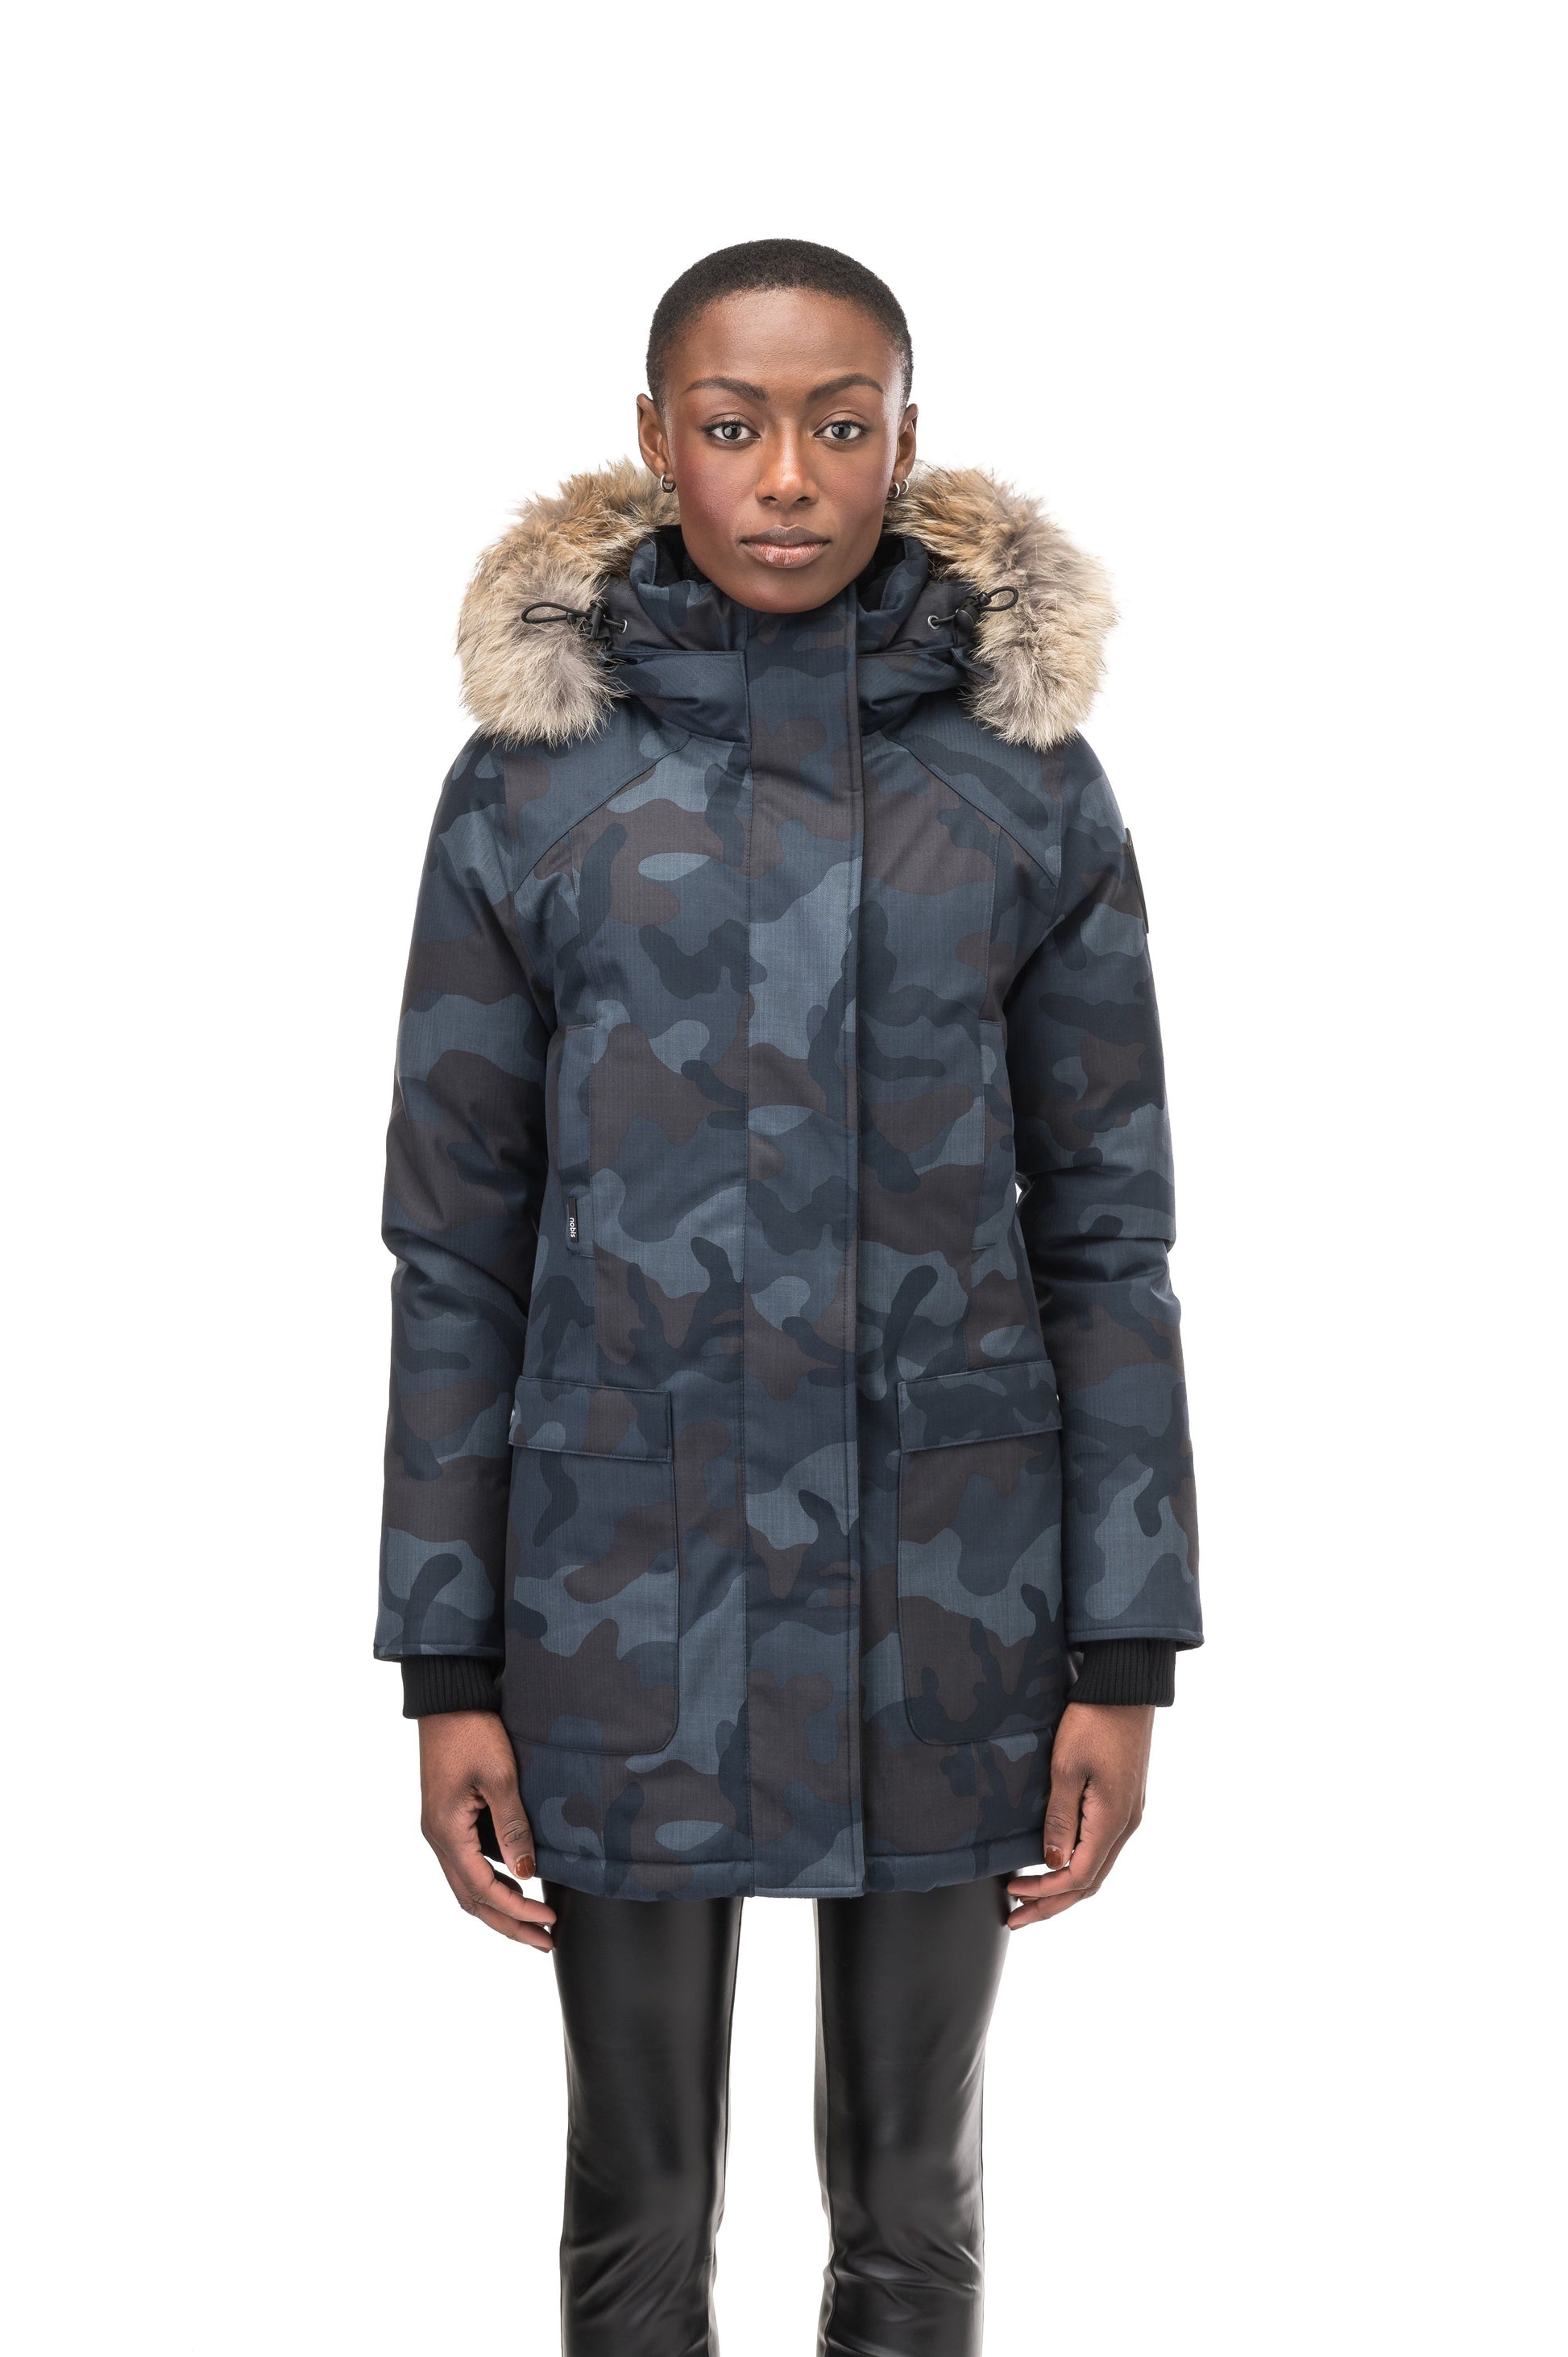 Women's down filled parka that sits just below the hip with a clean look and two hip patch pockets in Navy Camo